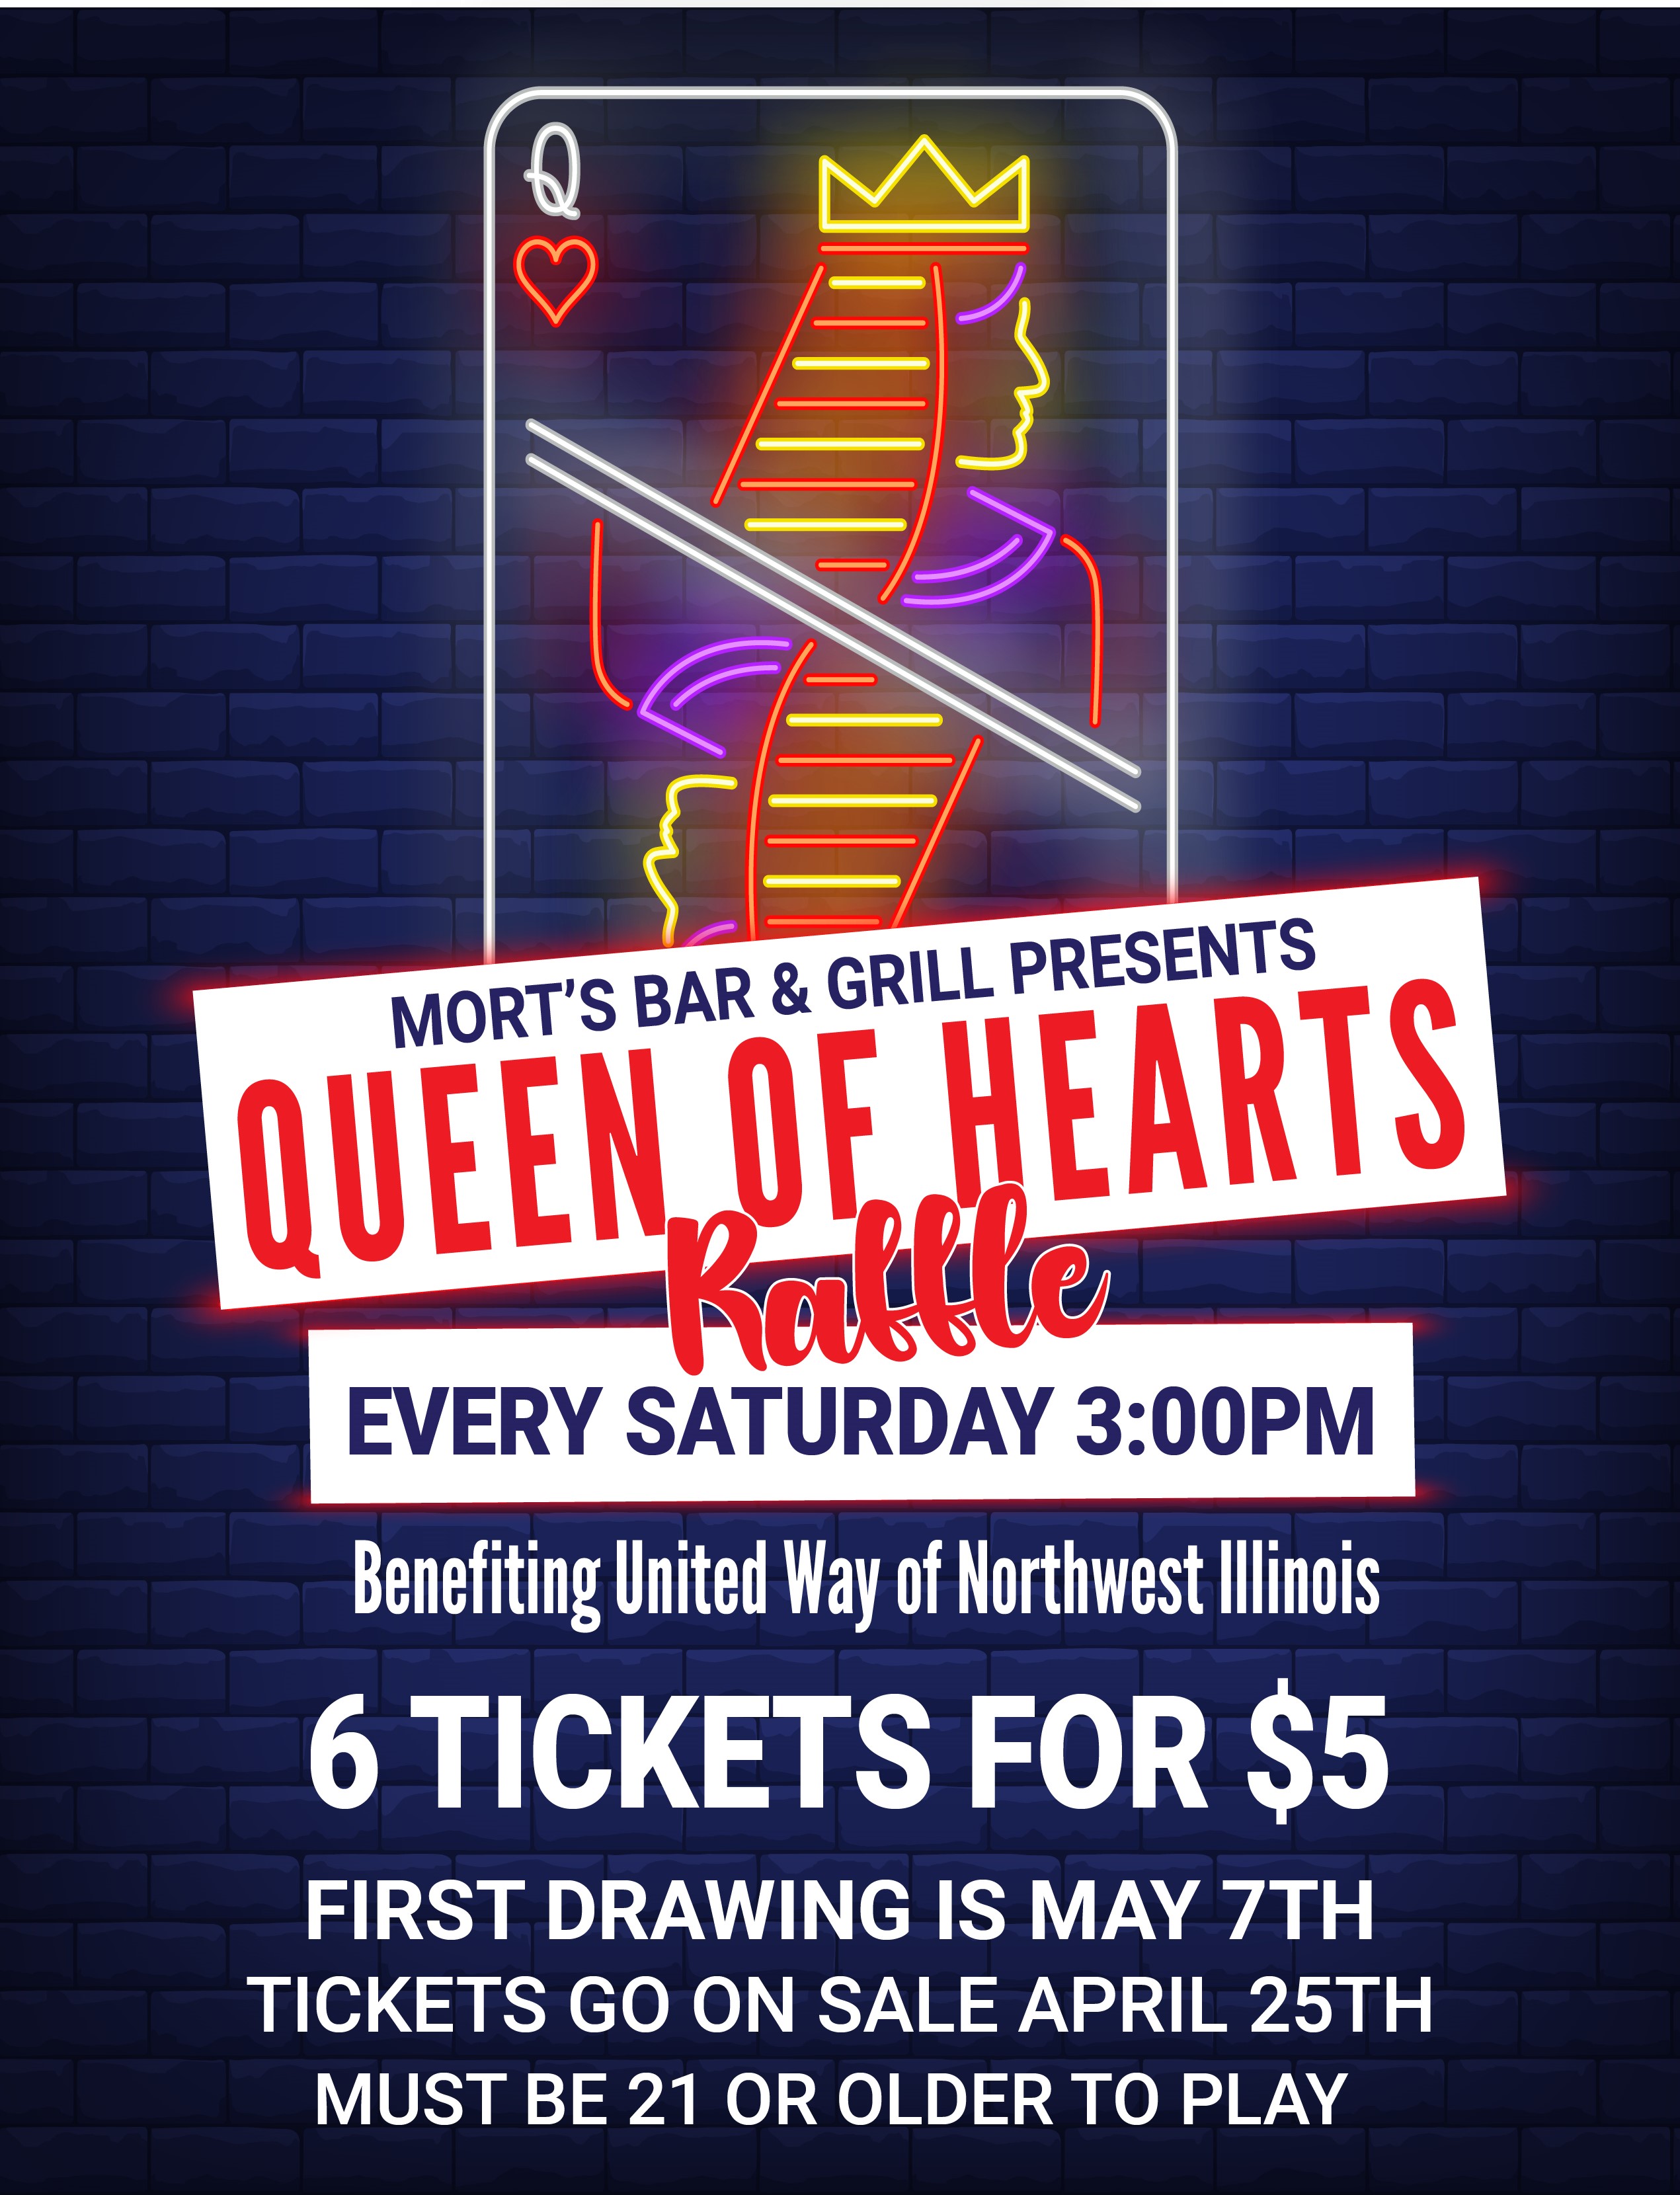 Queen of Hearts Flyer, drawing every saturday at 3 o'clock pm, tickets are 6 for 5 dollars